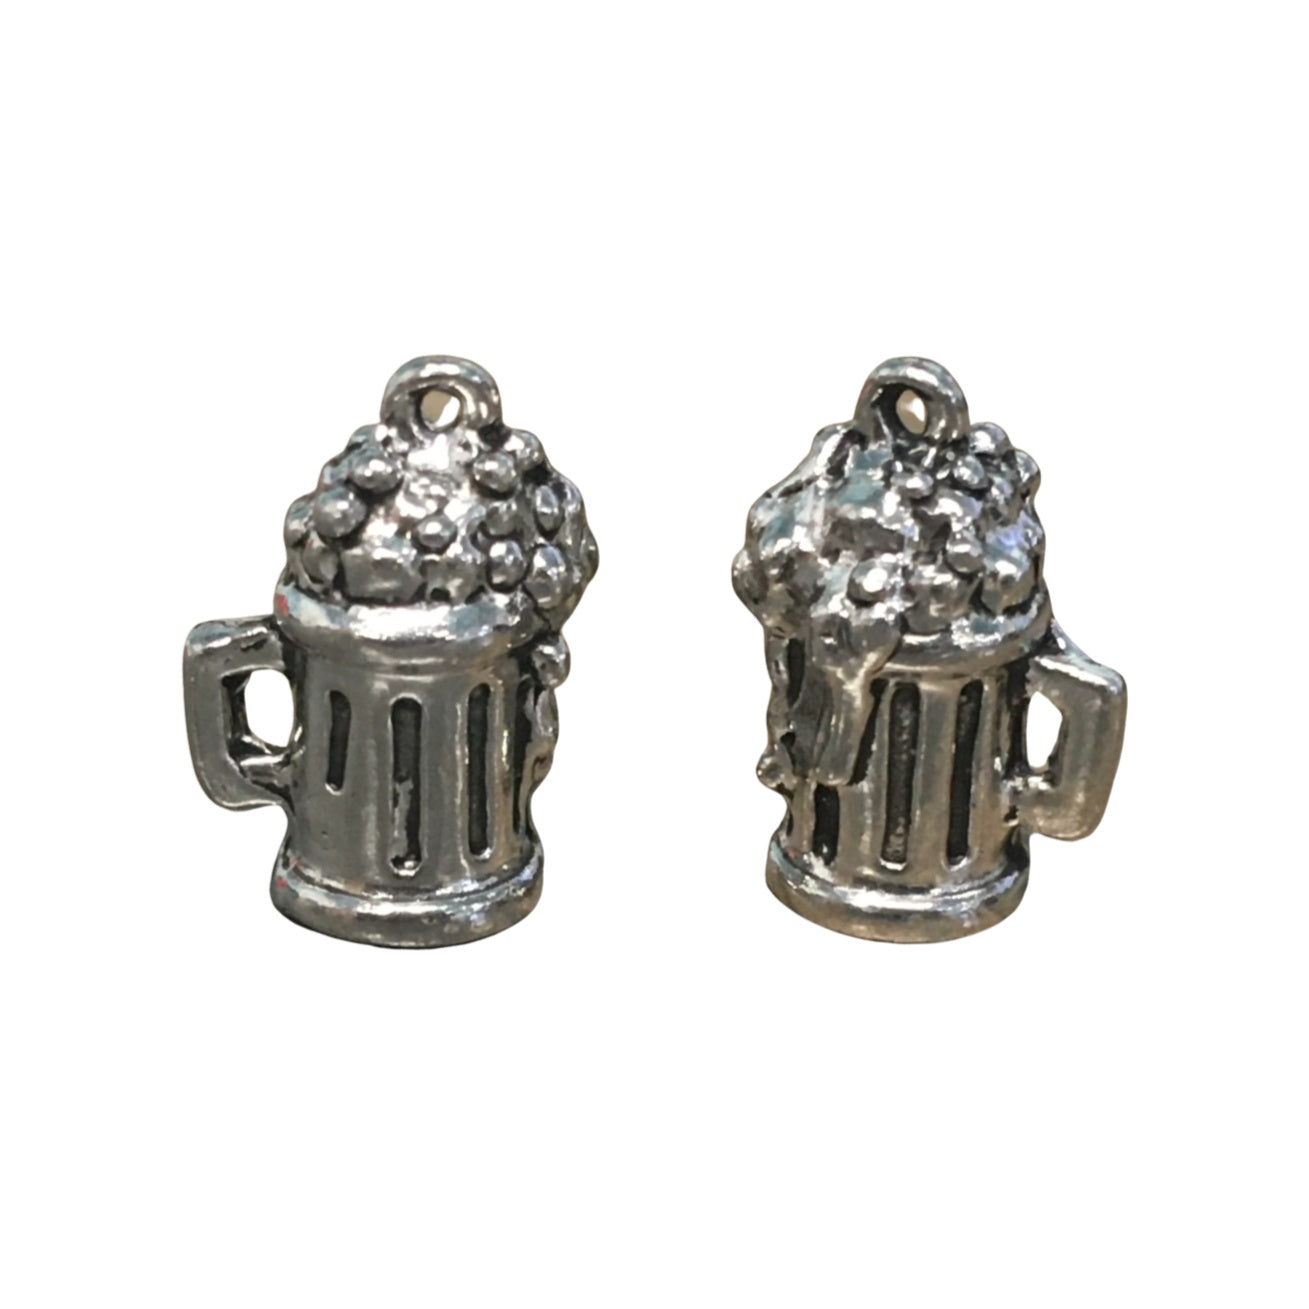 Frosty Beer Mug Charms - Qty 5 - Lead Free Pewter Silver - American Made